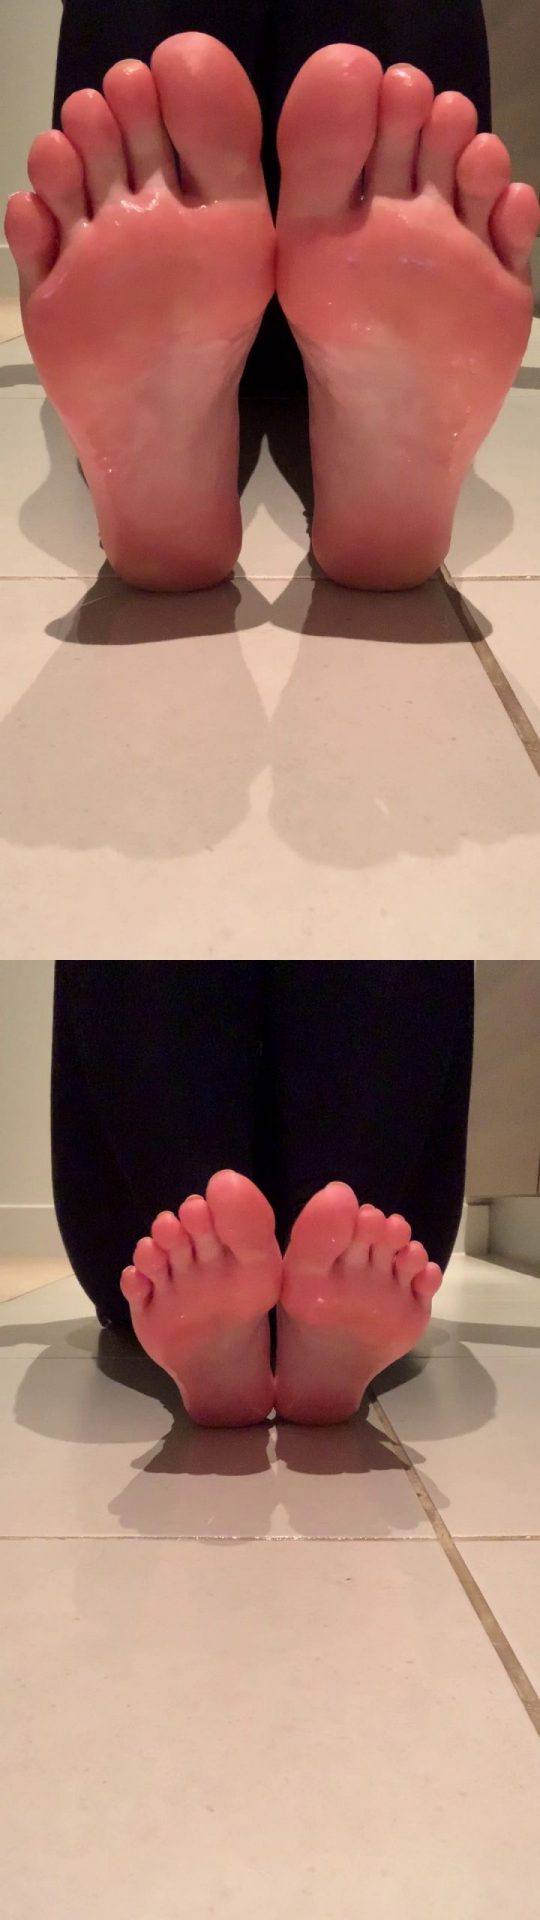 harrietfootsie 24 10 2019 75894175 easily one of my favourite videos pure succulent soles soaked in baby oil let